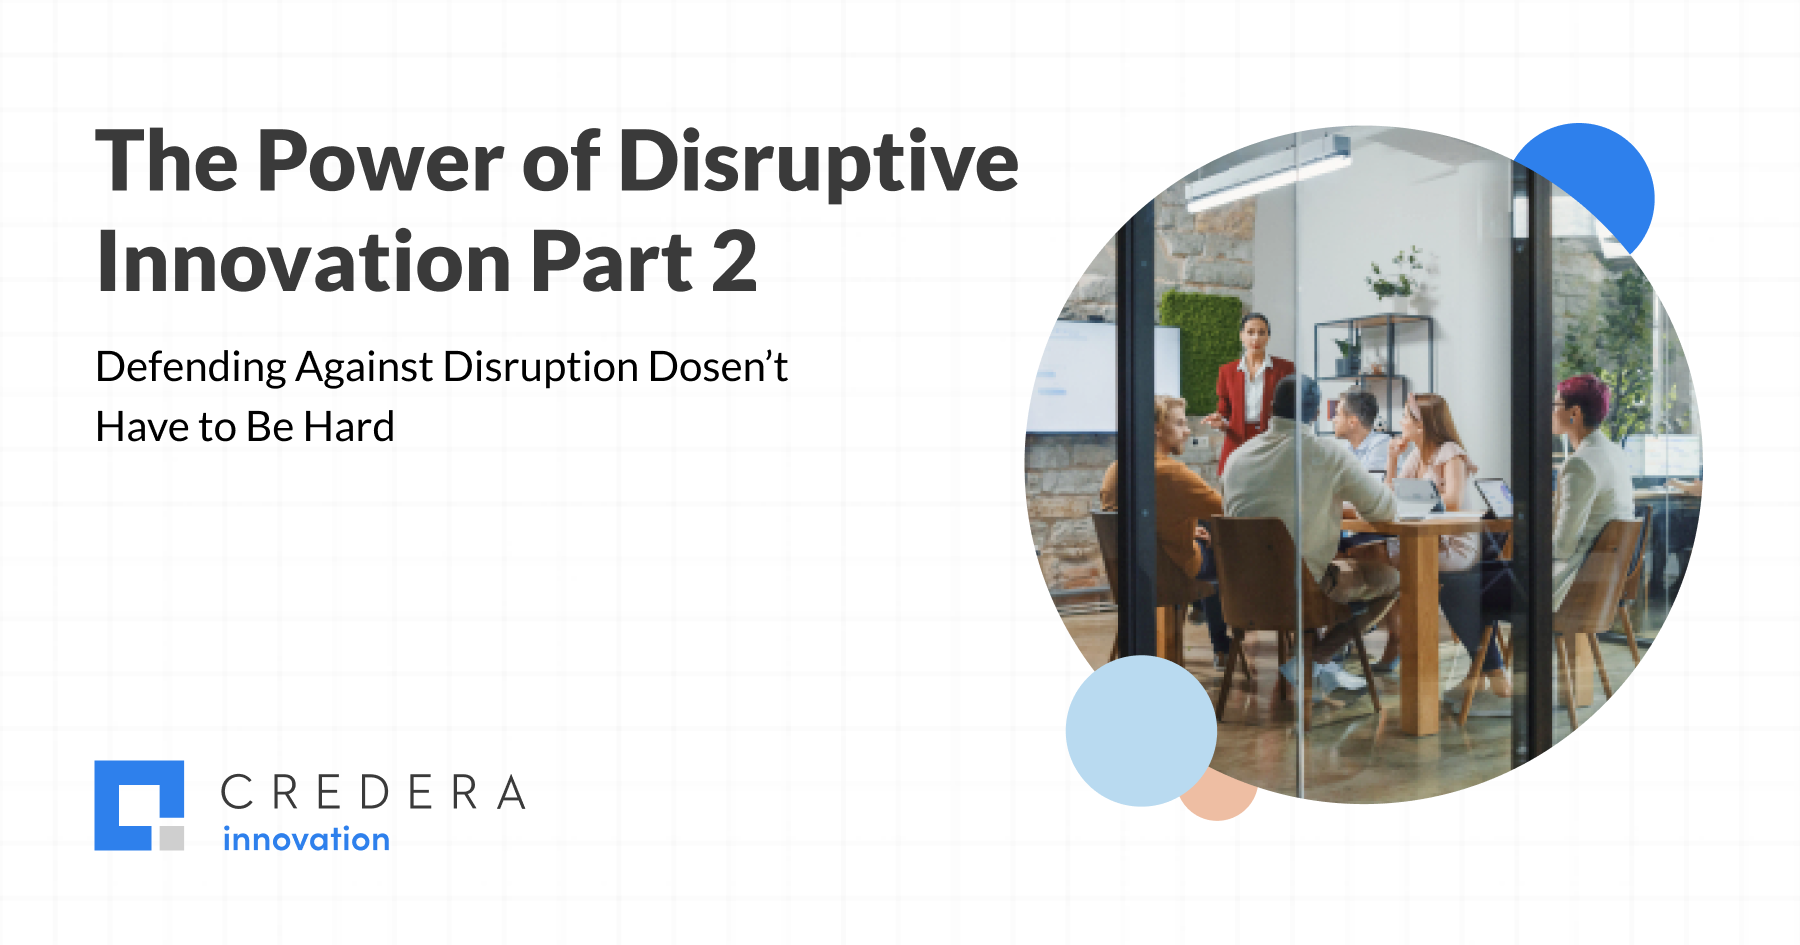 The Power of Disruptive Innovation Part 2:  Defending Against Disruption Doesn’t Have to Be Hard